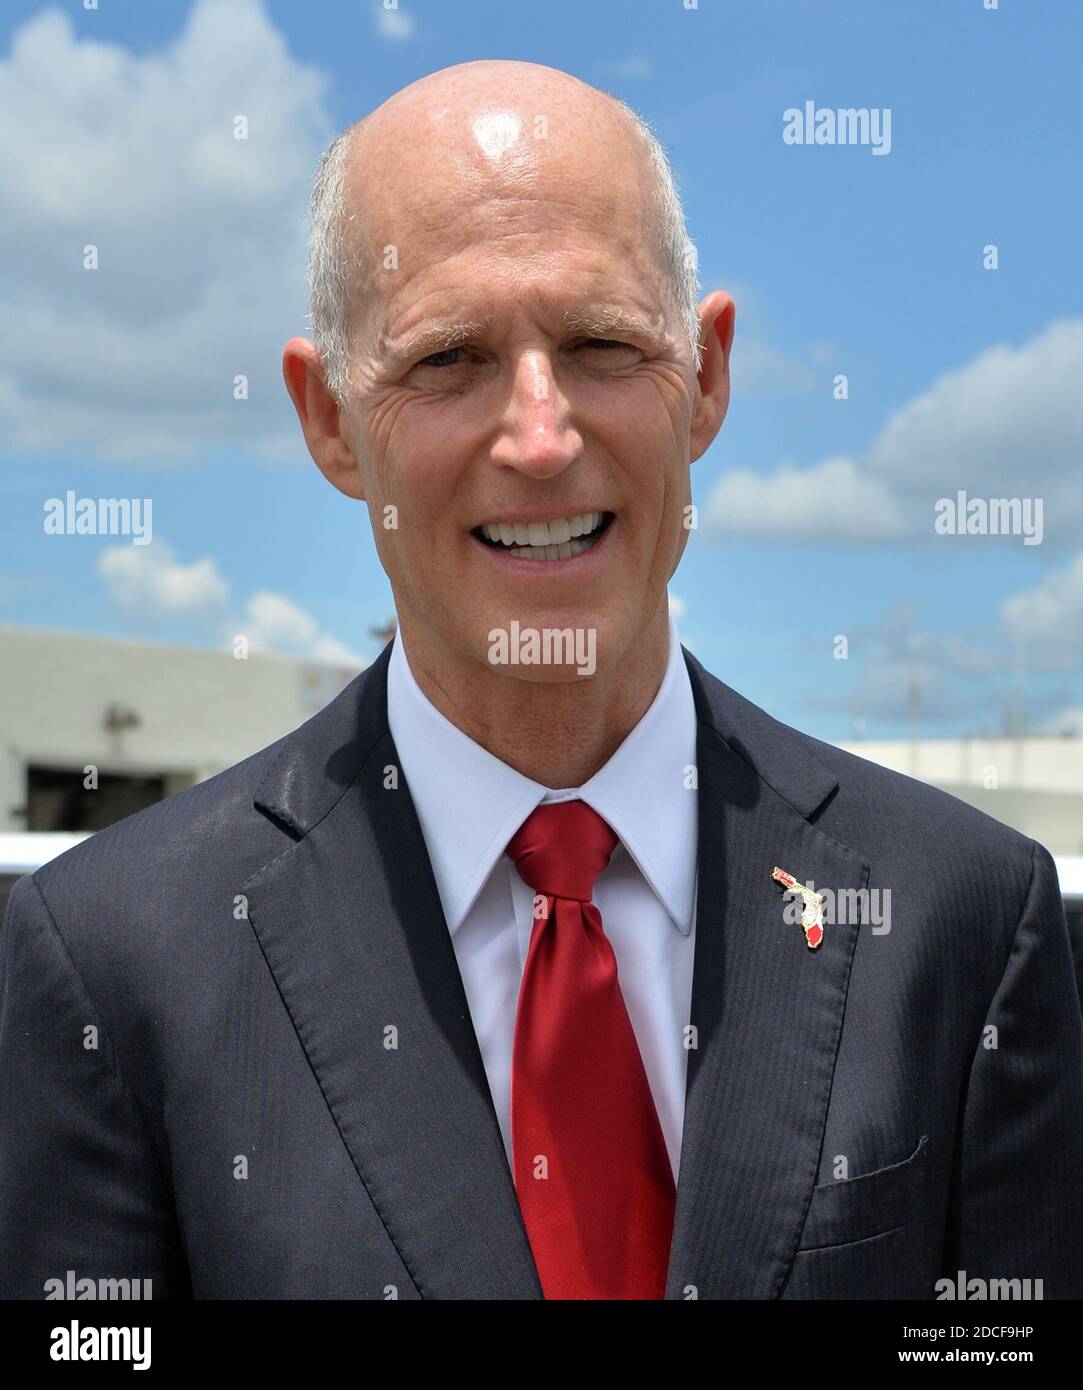 MIAMI, FL - FEBRUARY 25: Florida Governor Rick Scott greets U.S. President Barack Obama on Air Force One with a Florida Marlins cap at Miami International Airport on February 25, 2015 in Miami, Florida  People:  Florida Governor Rick Scott Credit: Hoo-me / MediaPunch Stock Photo